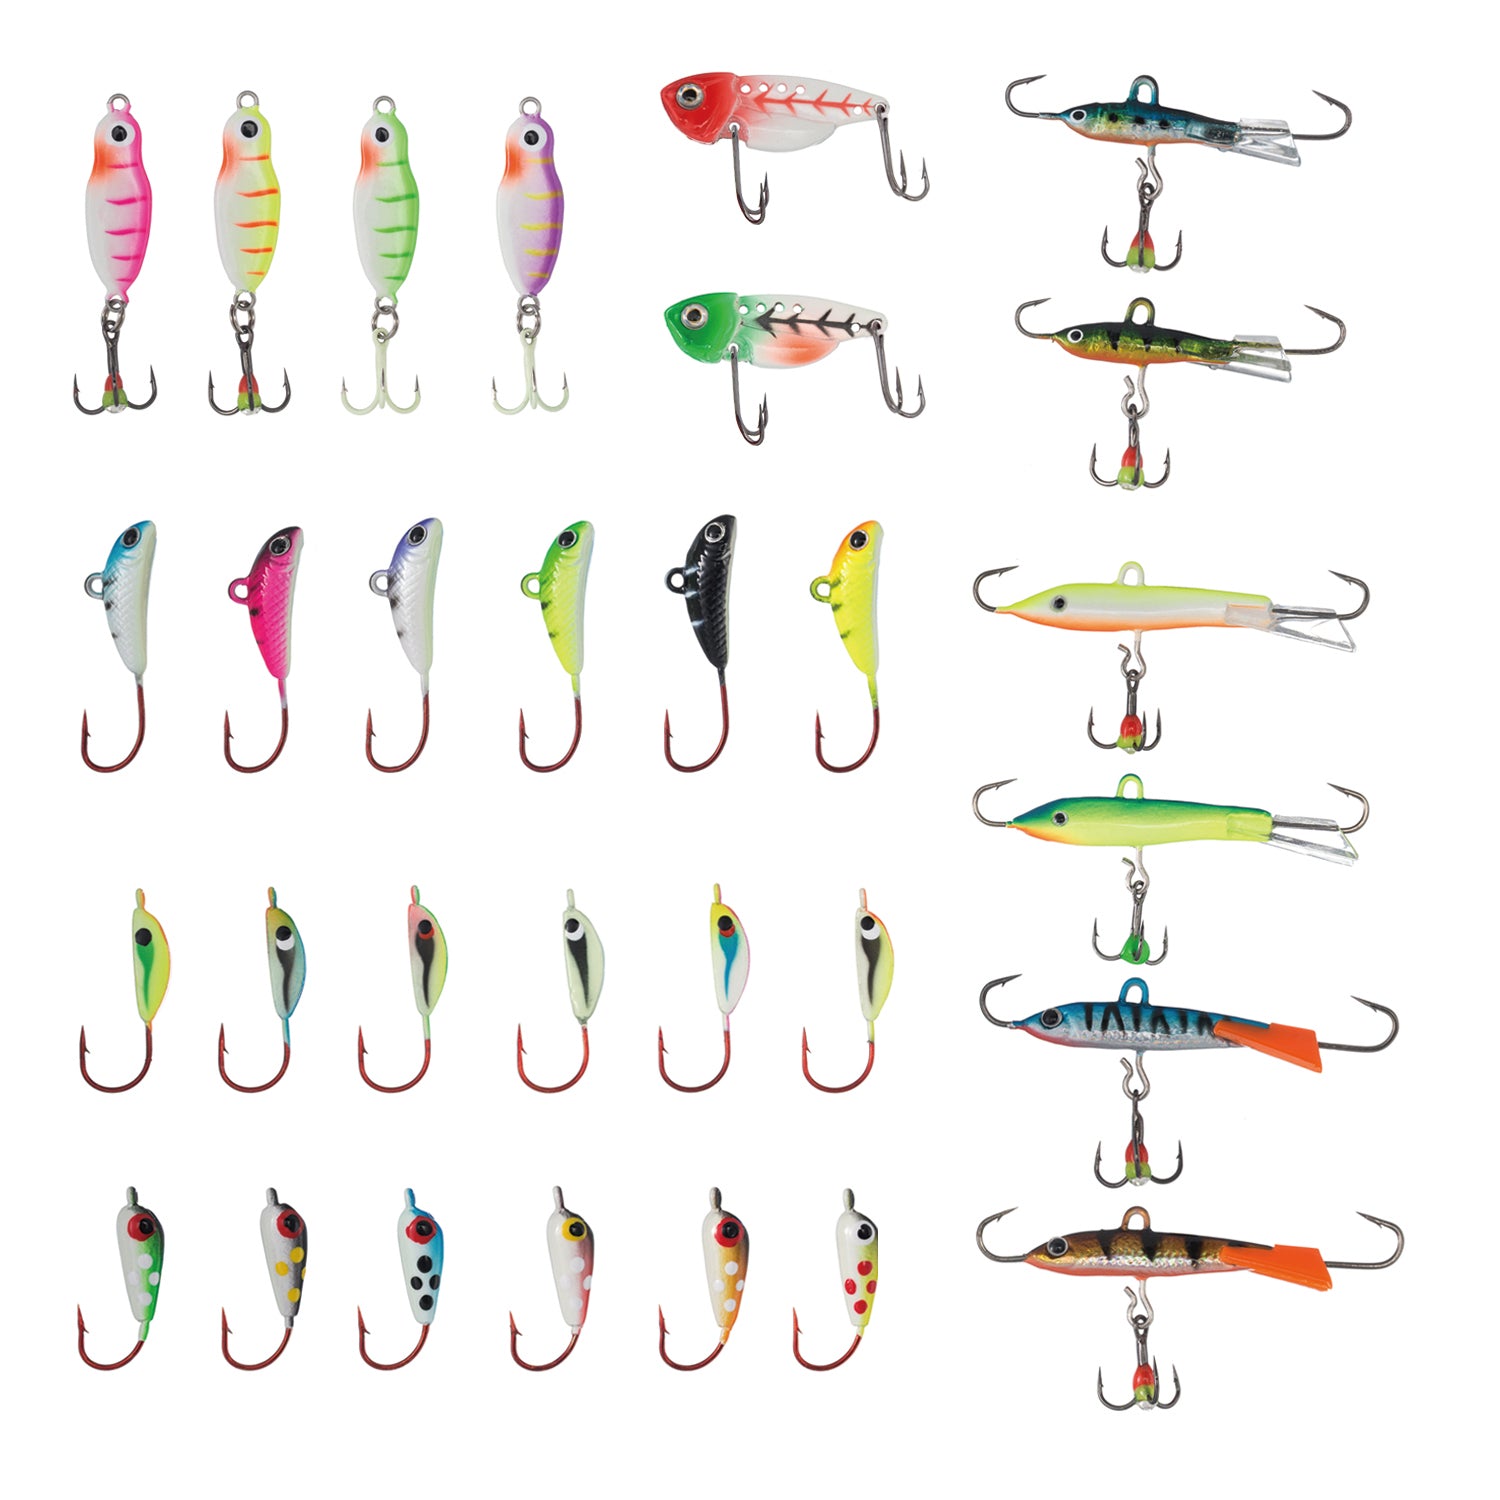  QualyQualy Ice Fishing Jigs Ice Fishing Lures Walleye Fishing  Lures Crappie Jigs Glow in Dark-Ice Fishing Jigs with Storage Box 38Pcs :  Sports & Outdoors